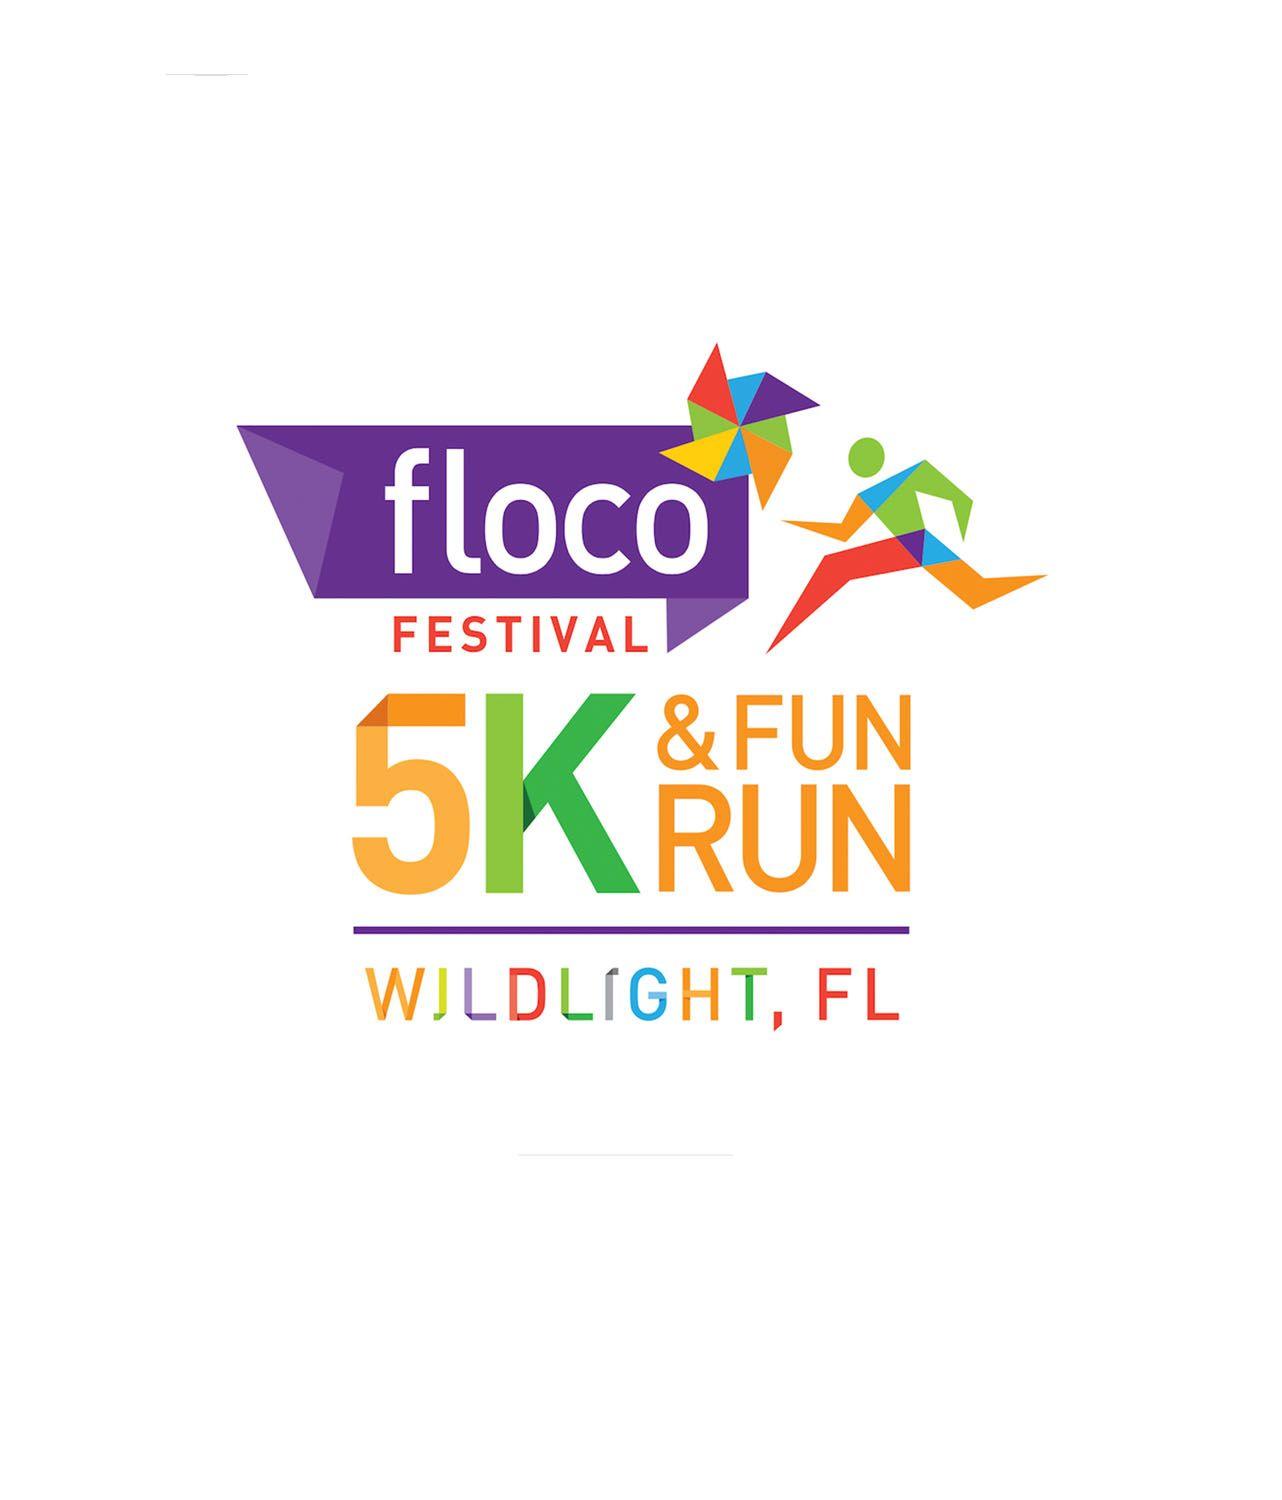 Fun Places Logo - floco logo. Florida Lowcountry Living. Raydient Places